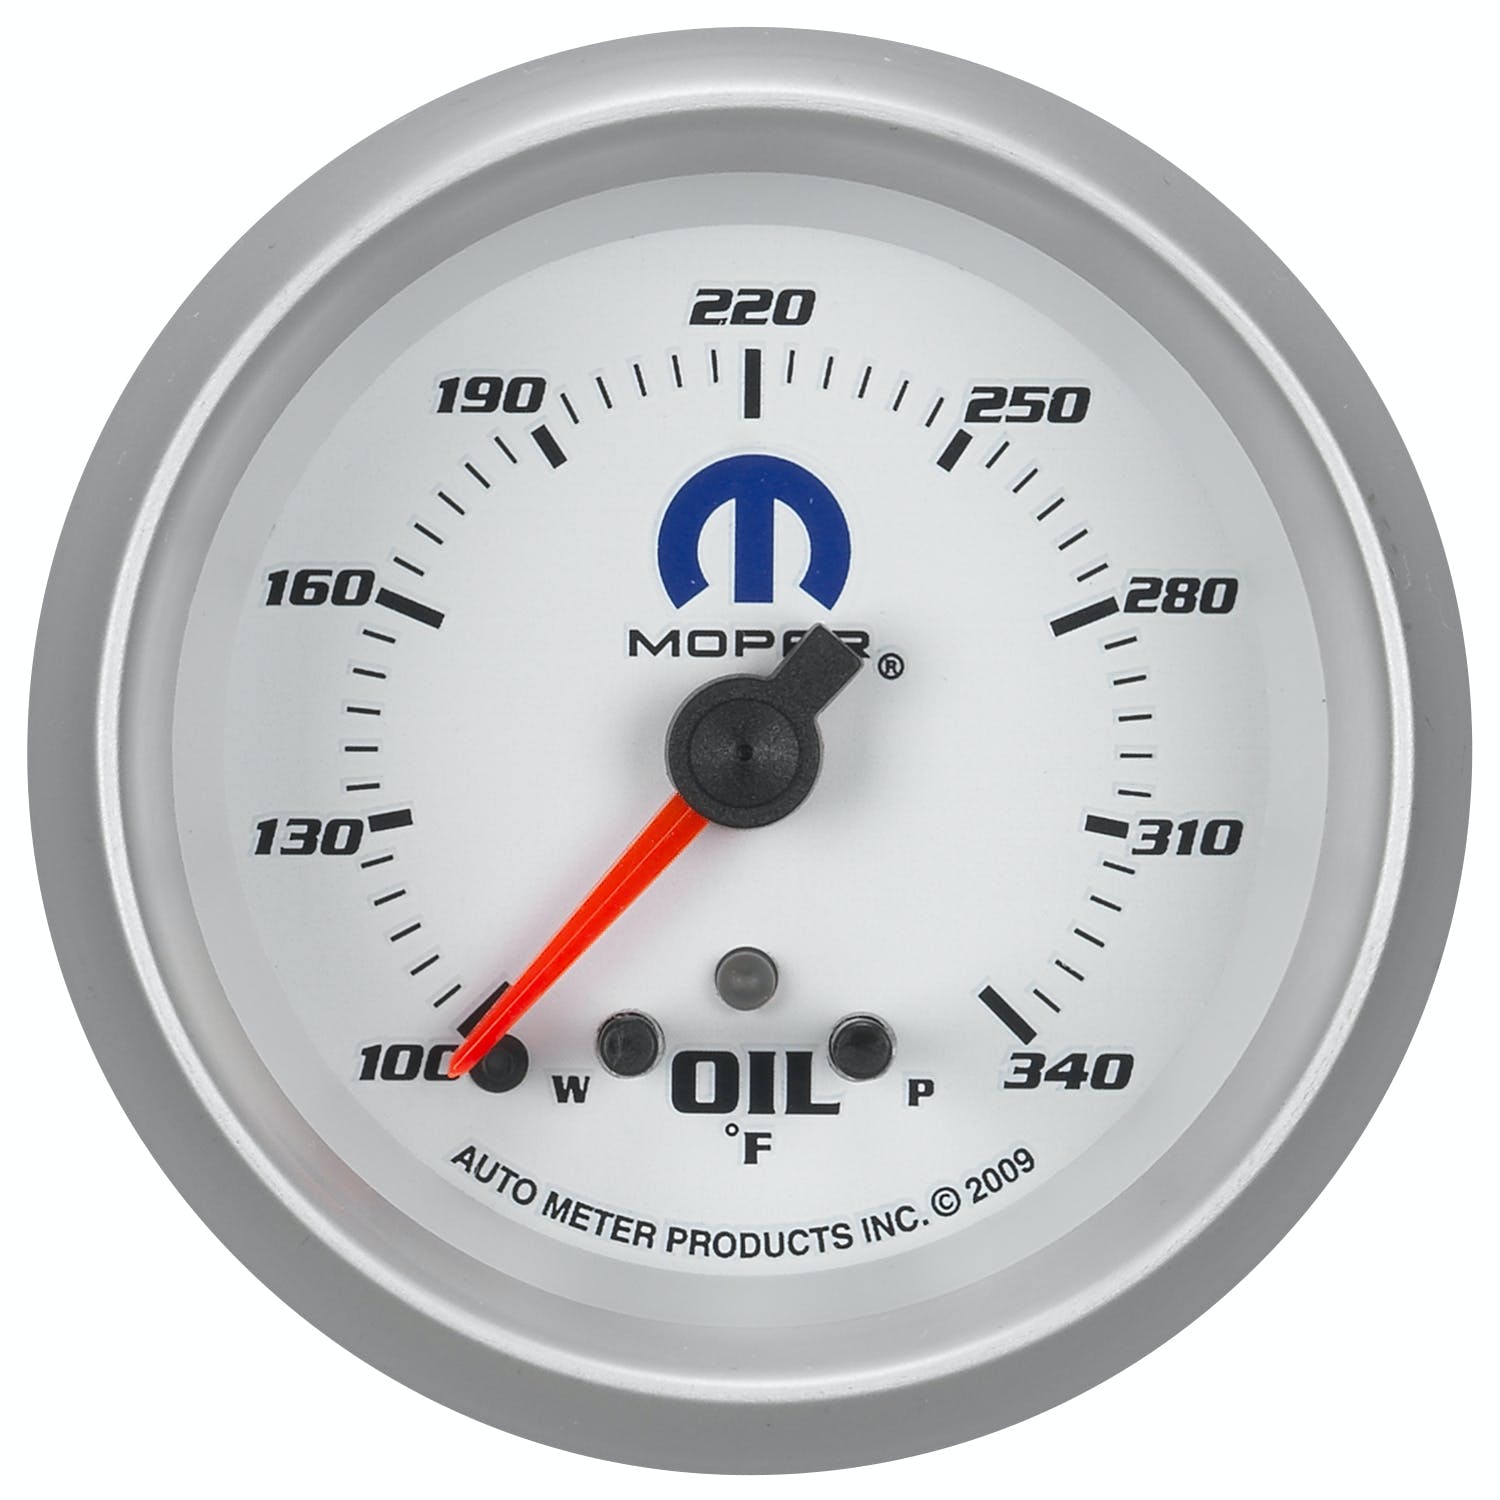 AutoMeter Products 880251 MOPAR Electric Oil Temperature Gauge 2 5/8 in. 140 - 340 Deg. F Full Sweep